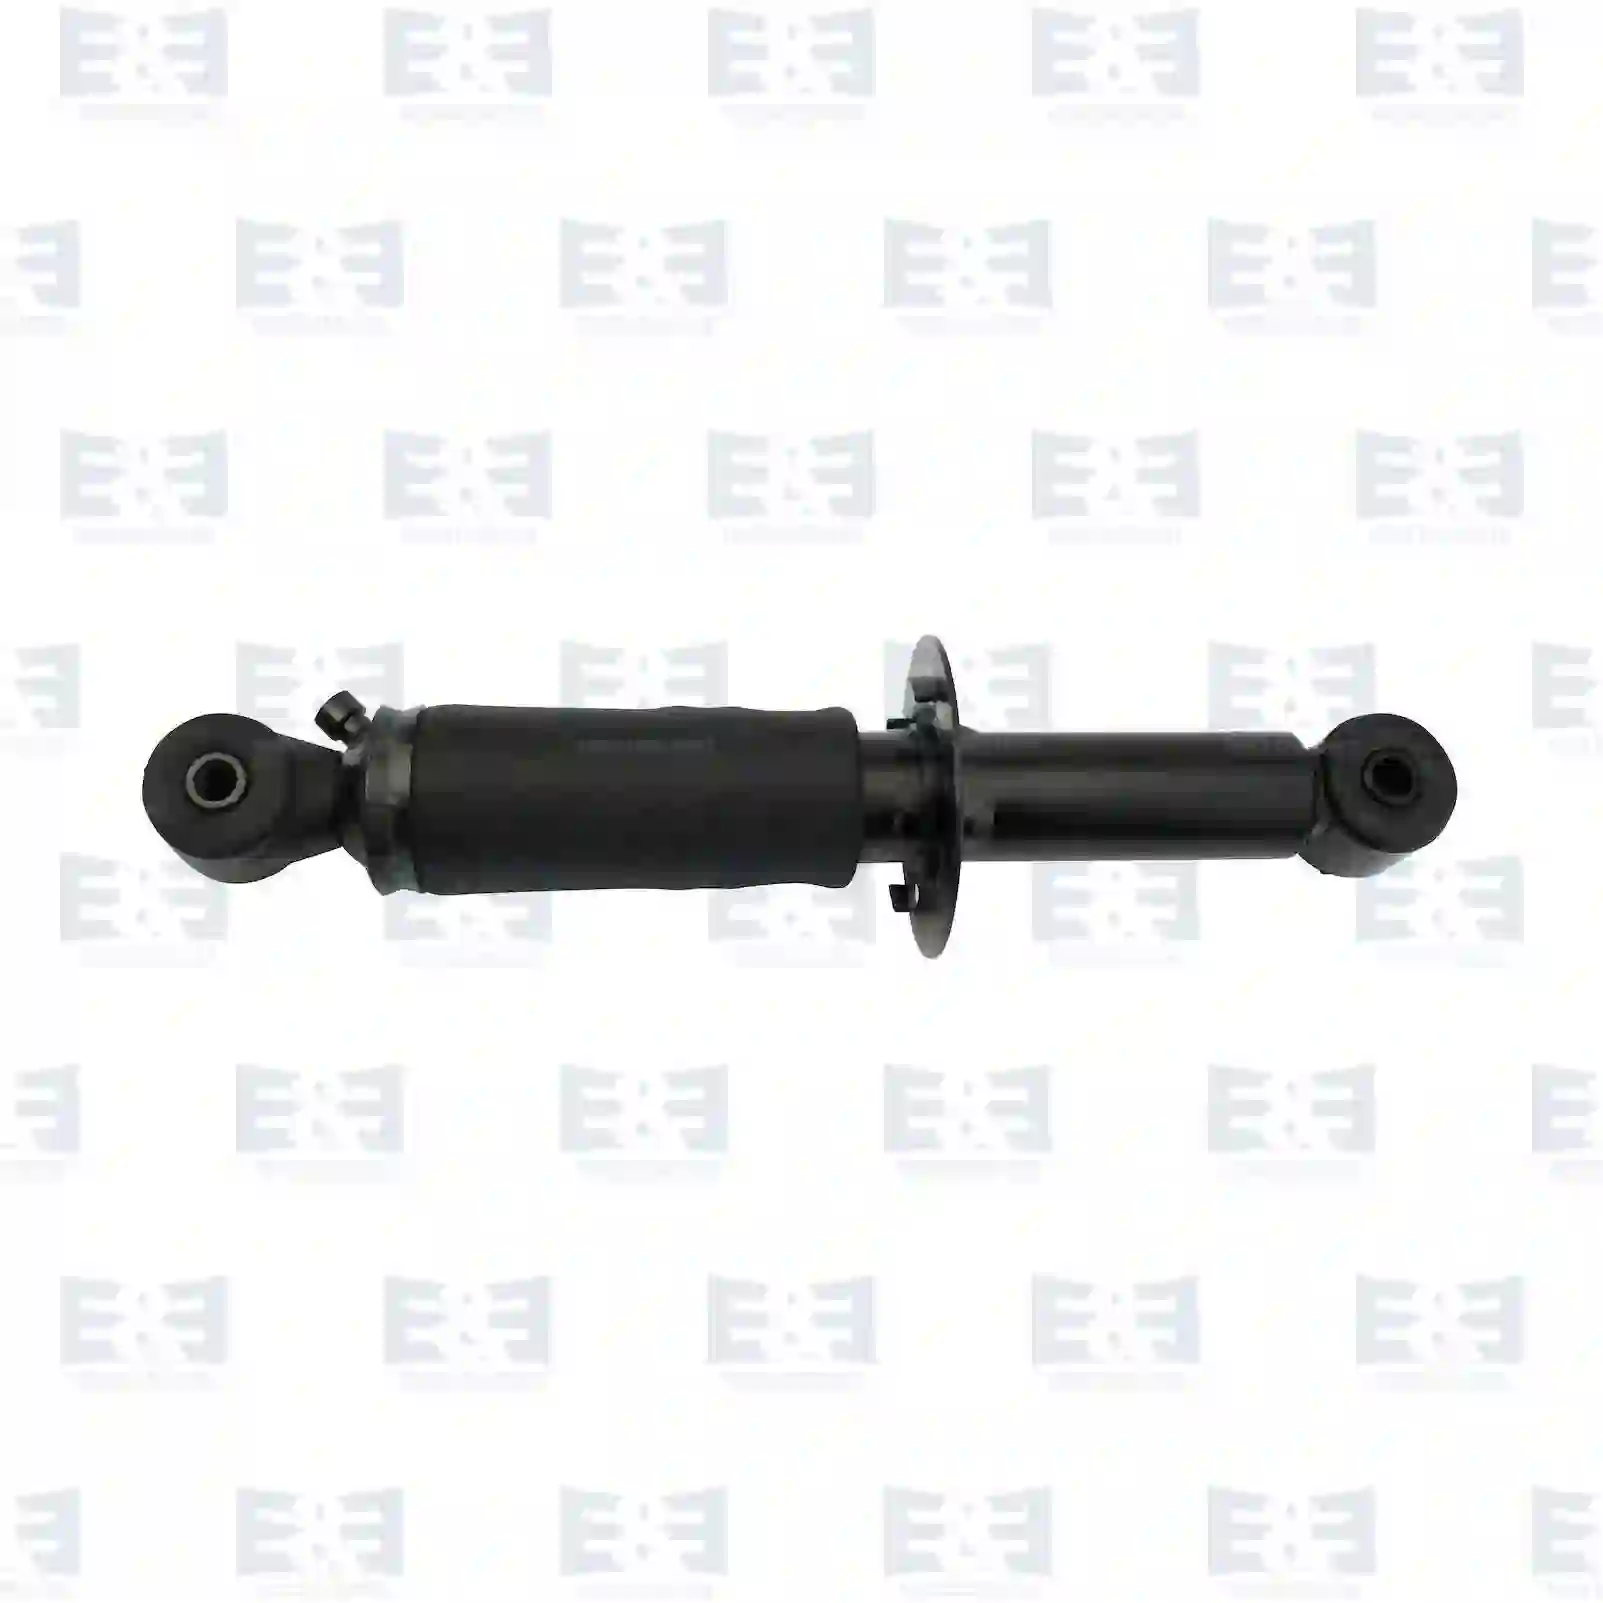 Cabin shock absorber, with air bellow, 2E2275373, 1075444, , , , ||  2E2275373 E&E Truck Spare Parts | Truck Spare Parts, Auotomotive Spare Parts Cabin shock absorber, with air bellow, 2E2275373, 1075444, , , , ||  2E2275373 E&E Truck Spare Parts | Truck Spare Parts, Auotomotive Spare Parts